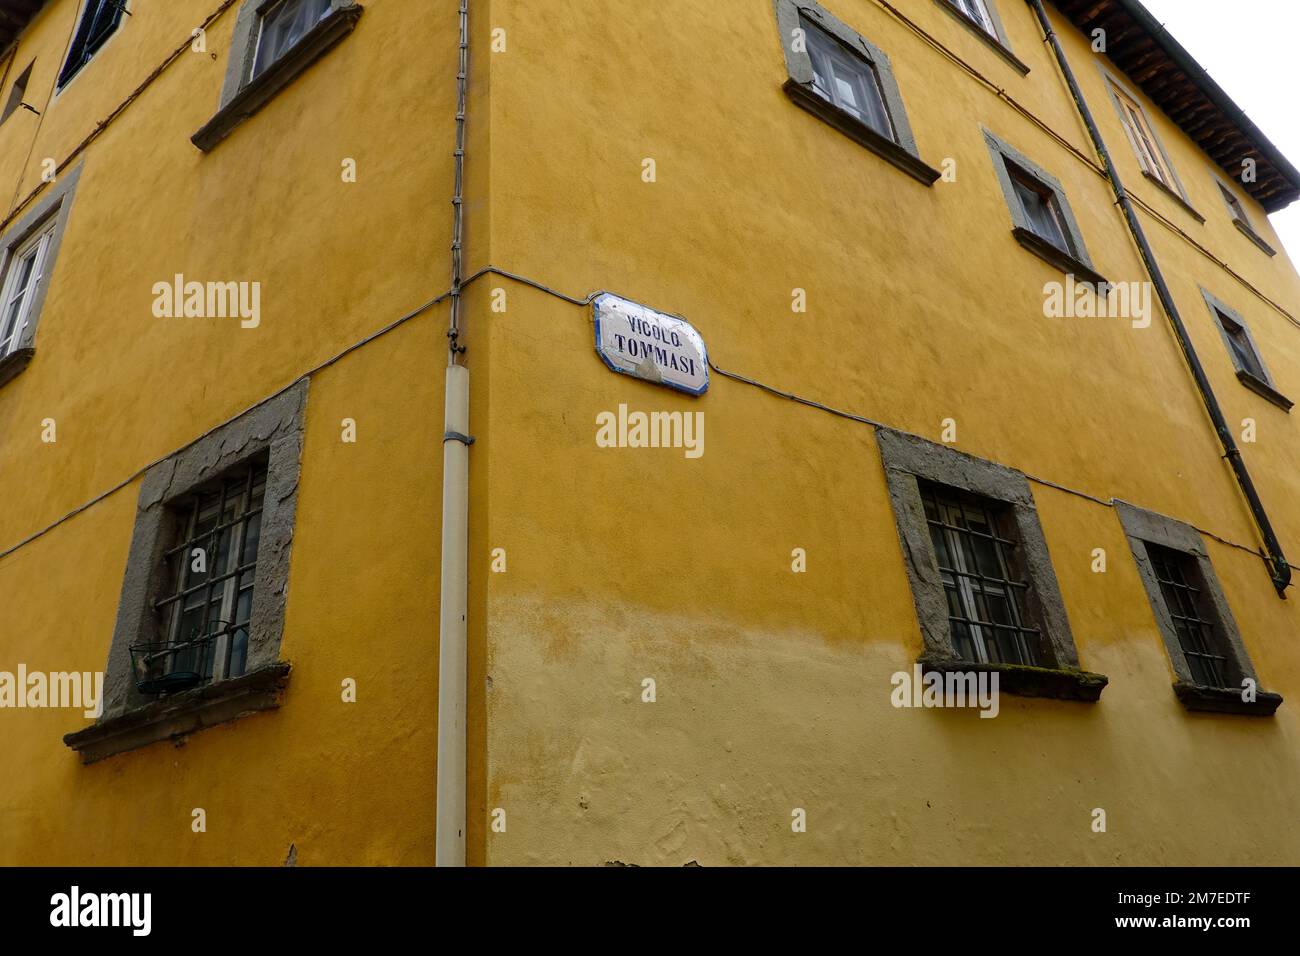 Street sign, on old Tuscan building, for Vicolo Tommasi, alley within the old town Lucca, Italy. Stock Photo